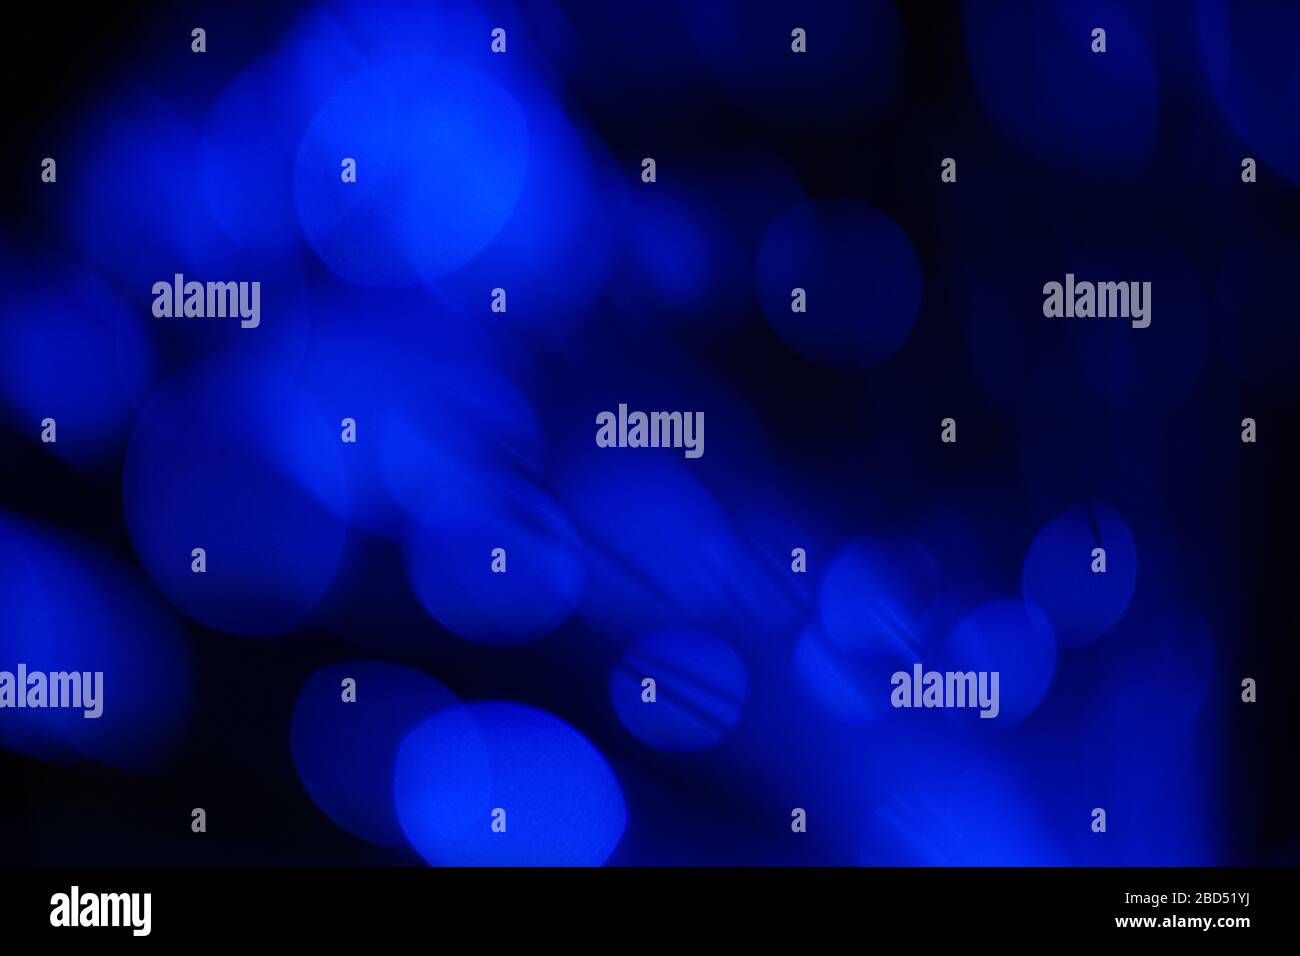 Abstract background with classic blue lights. It can be used as overlay. Stock Photo